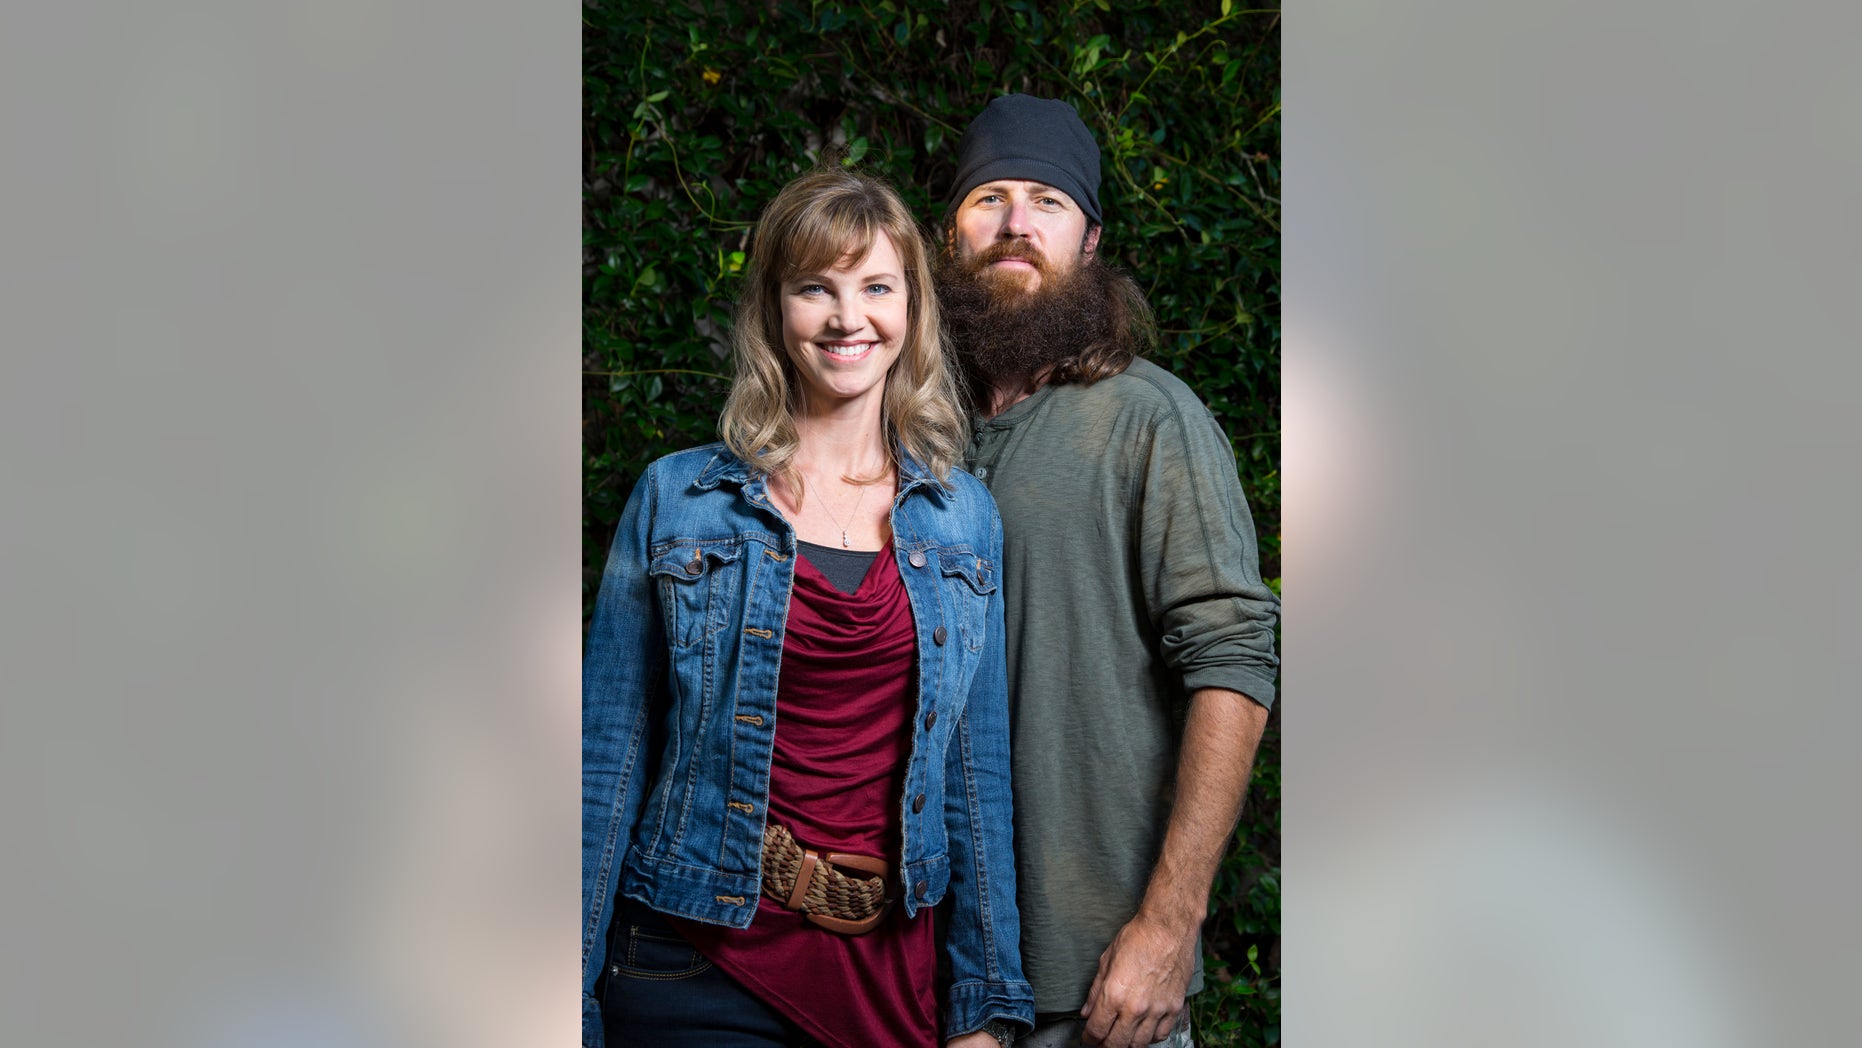 Missy Robertson's first date with Jase was a revenge date! Fox News